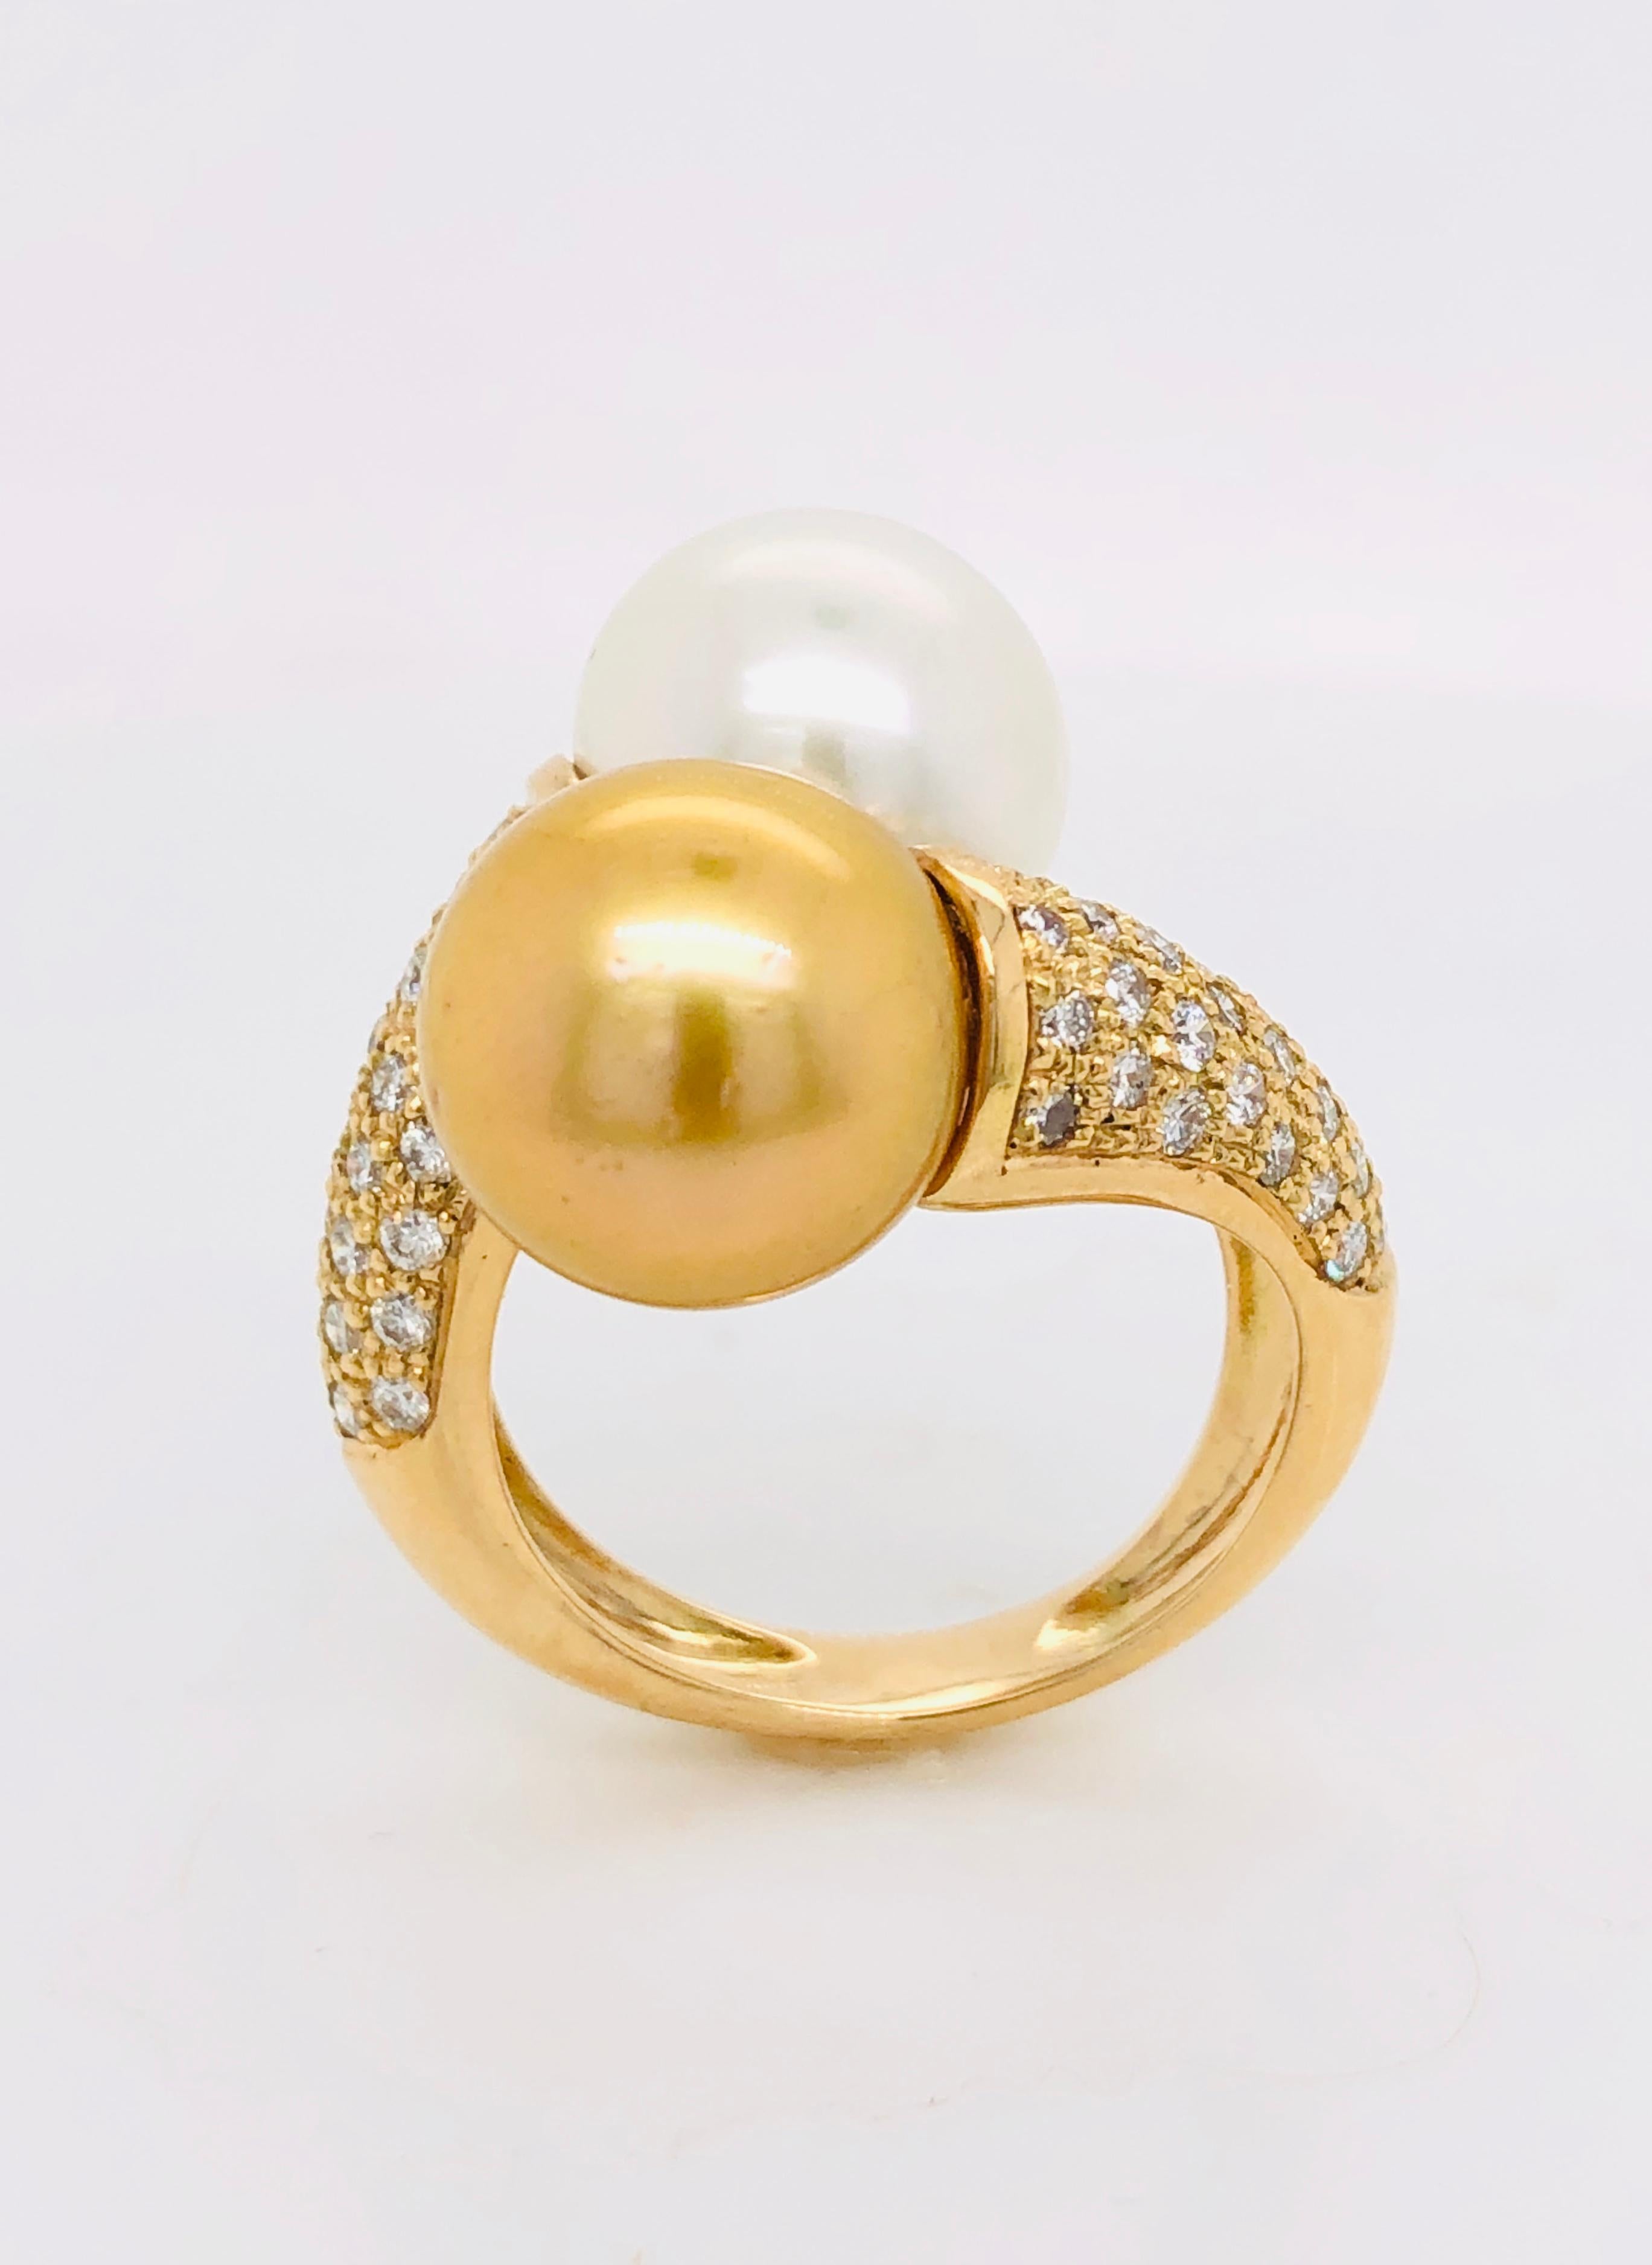 South Sea Pearls With White Diamonds on Gold 18 carats Ring
White and Gold South Sea Pearls 5
White diamonds 1.2 ct 
French Size : 54.5
US Sise : 7 1/4
British Size : 0
Weight of gold : 7.87